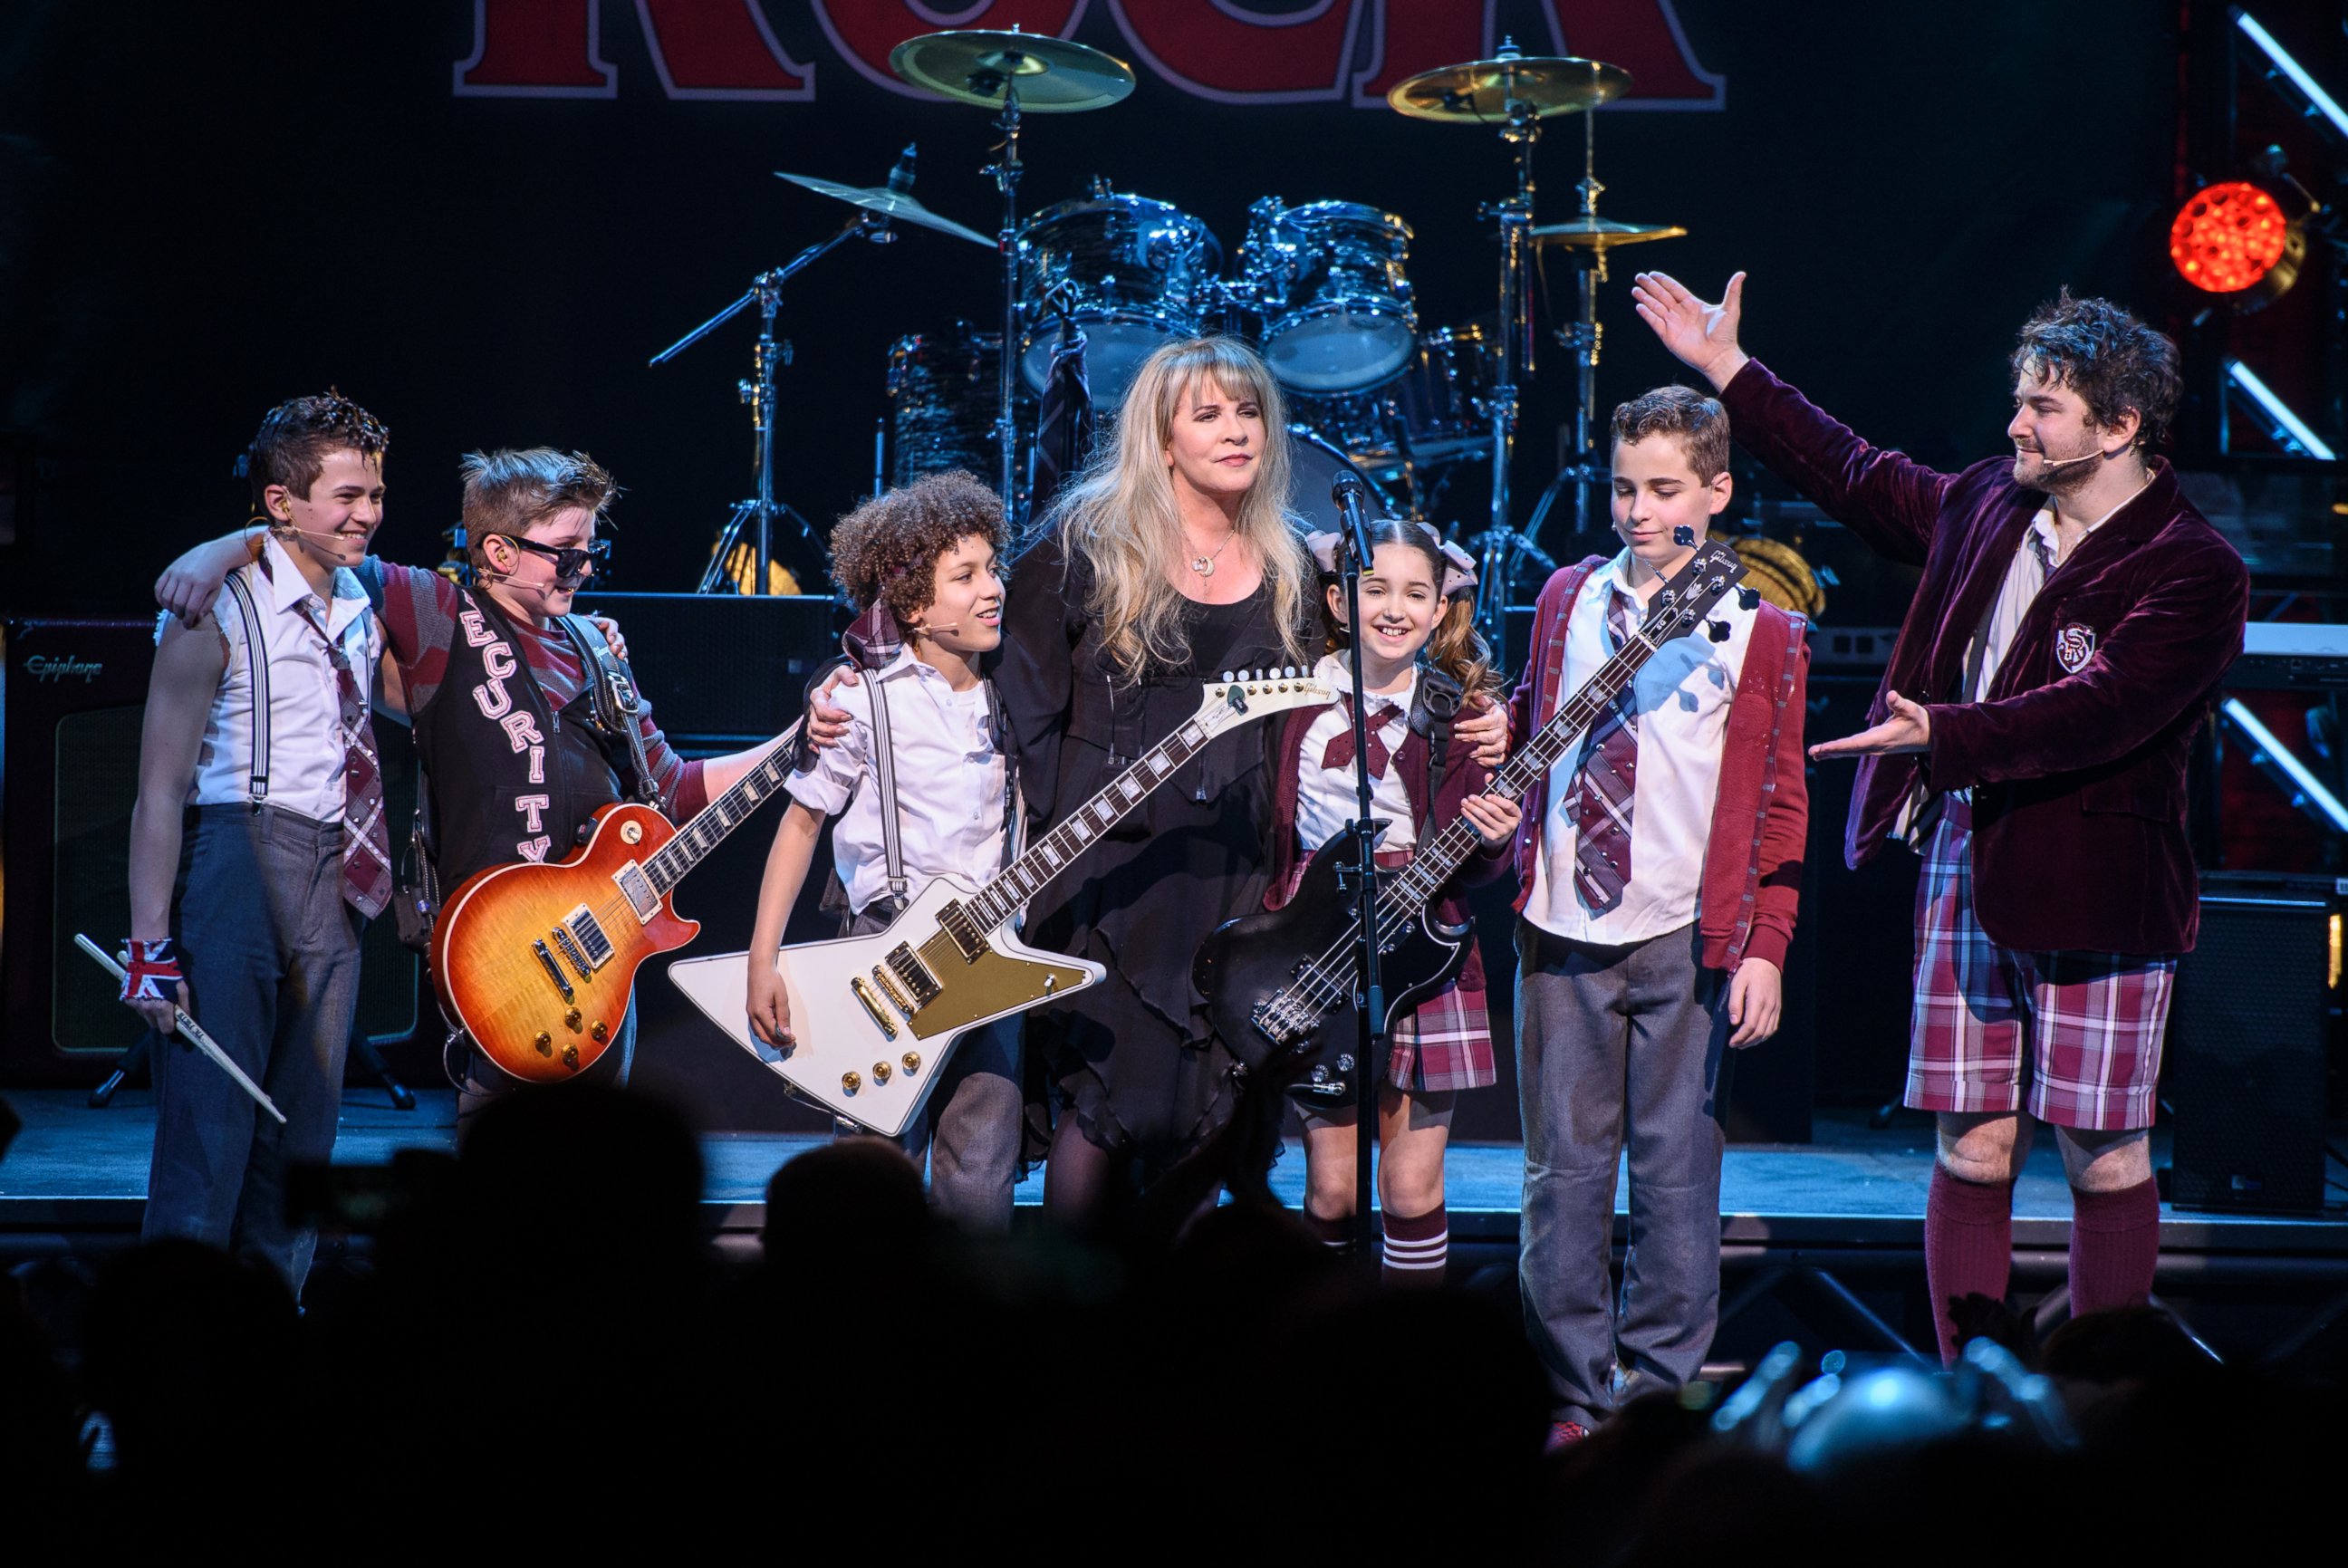 PHOTO: Stevie Nicks of the band Fleetwood Mac performs live on stage with the cast of "School of Rock - The Musical" at the Winter Garden Theatre on April 26, 2016 in New York City.  